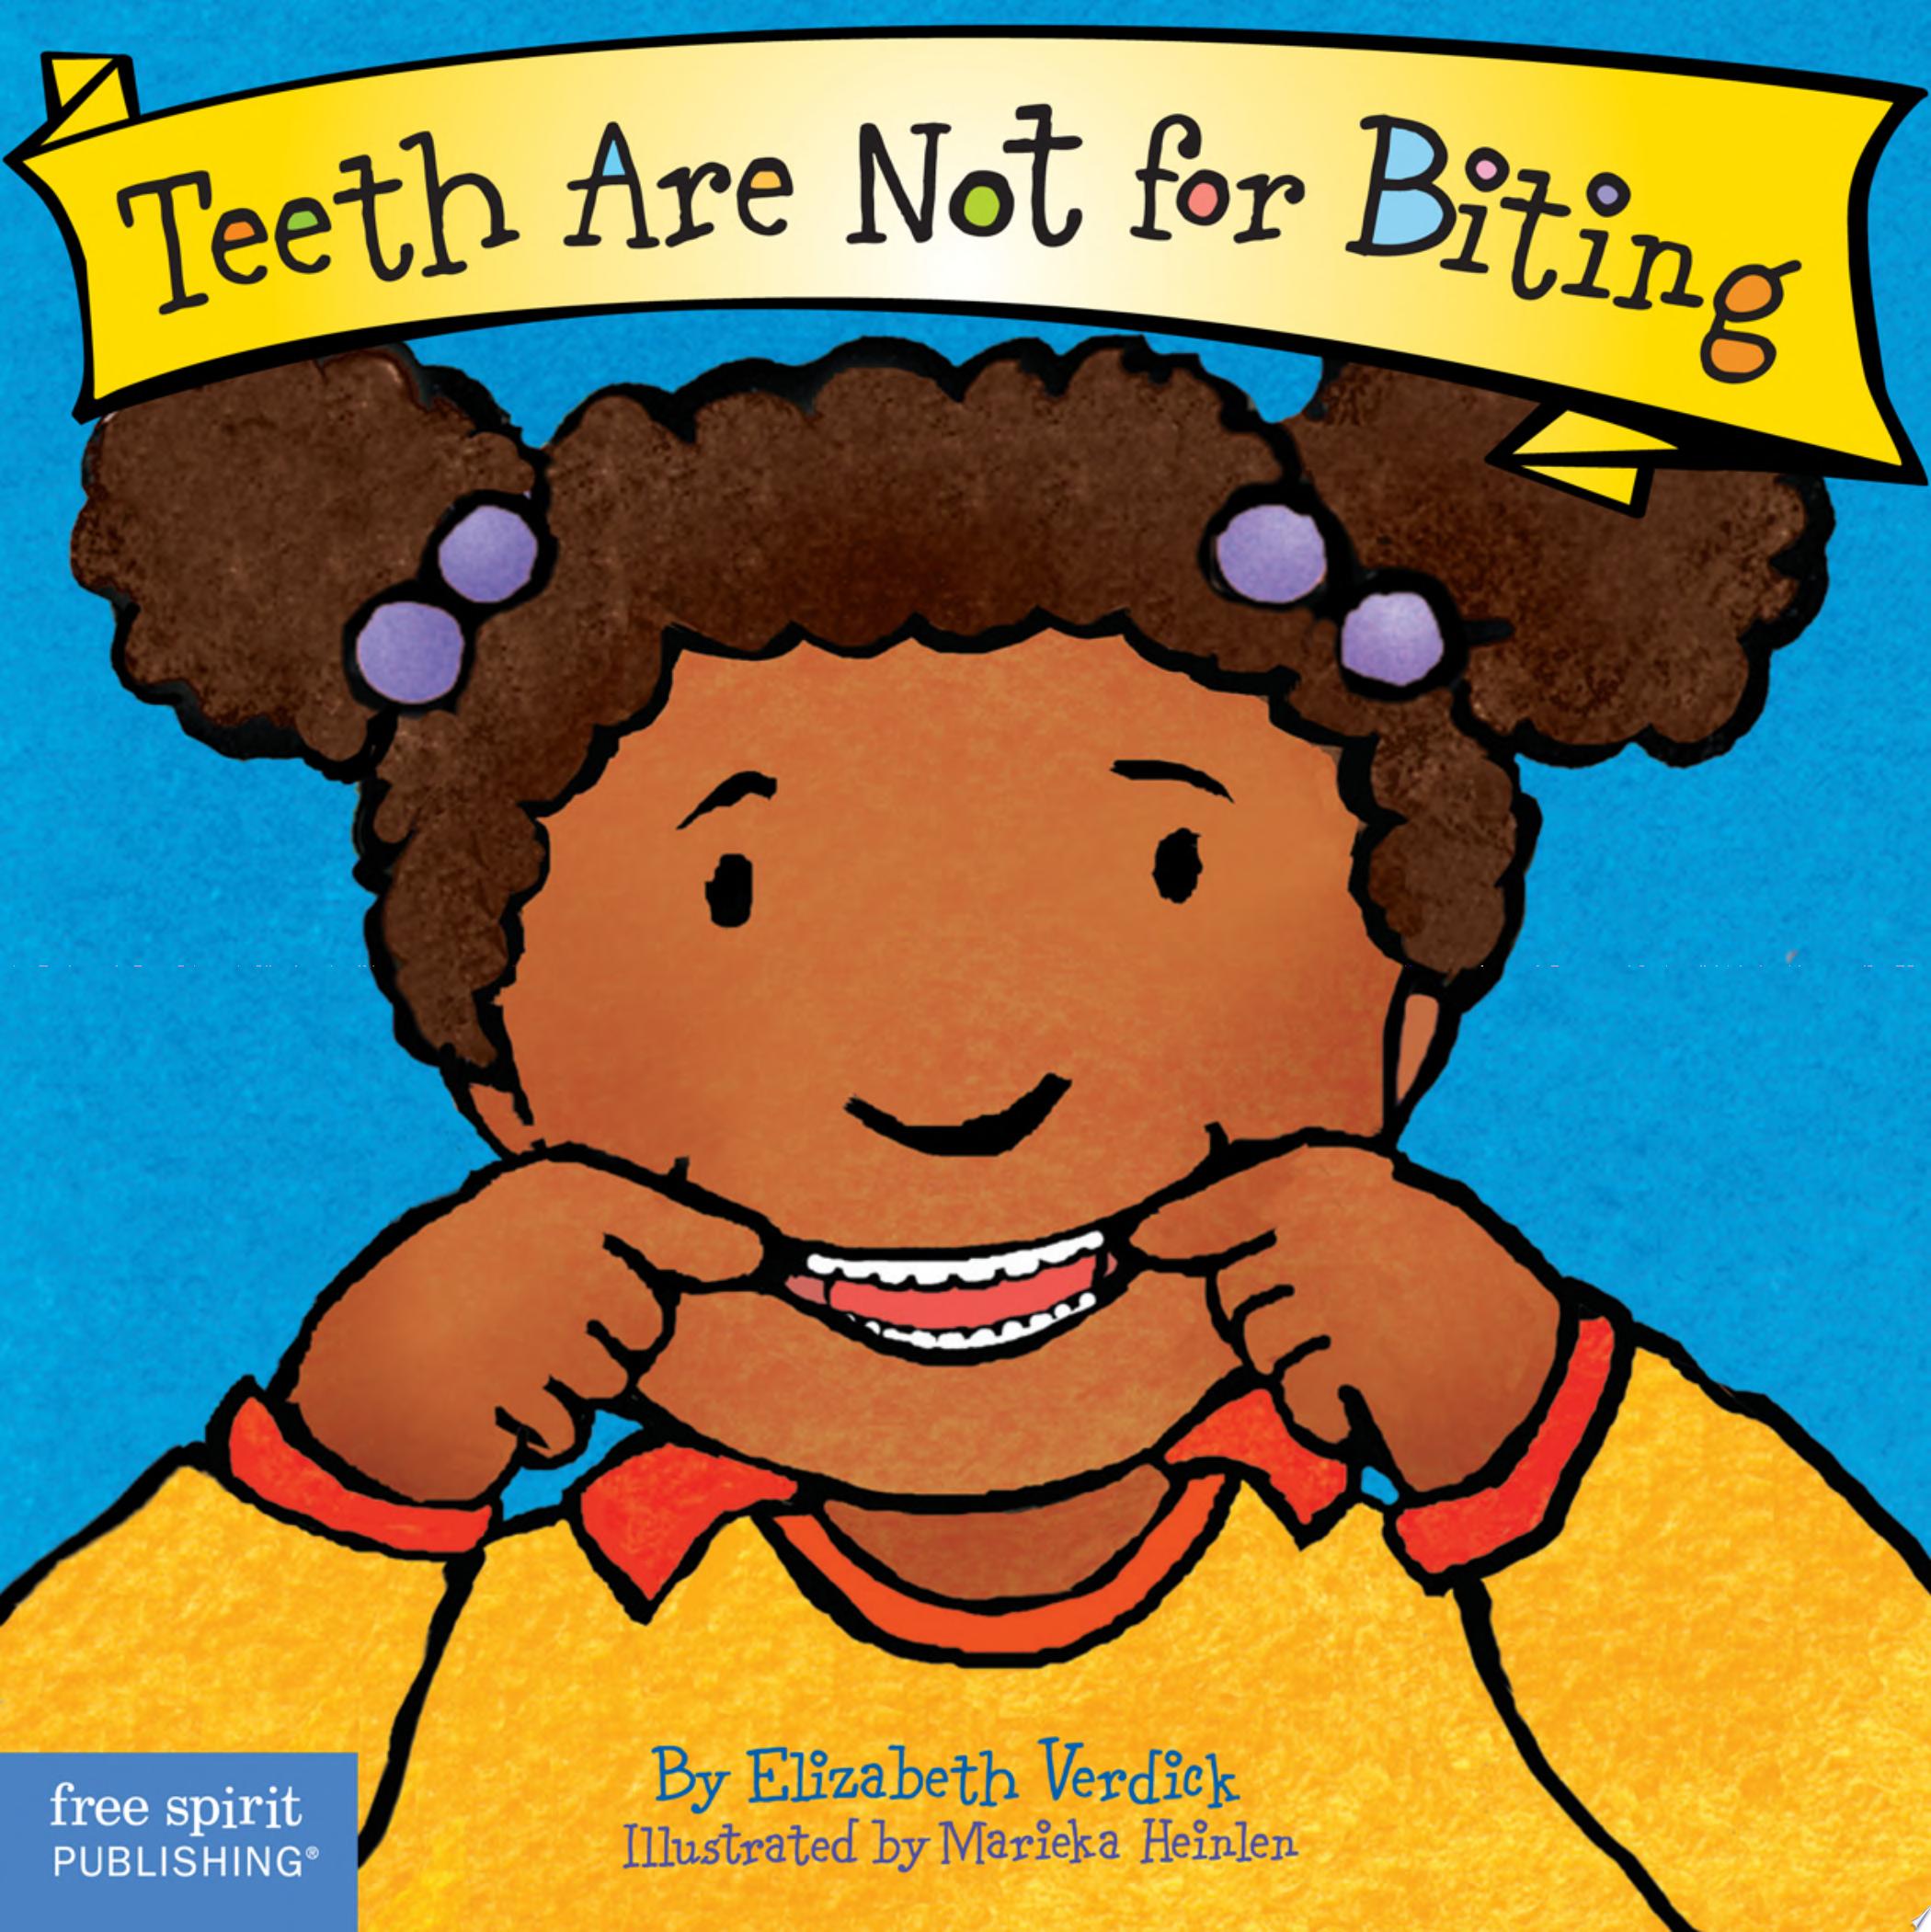 Image for "Teeth Are Not for Biting"